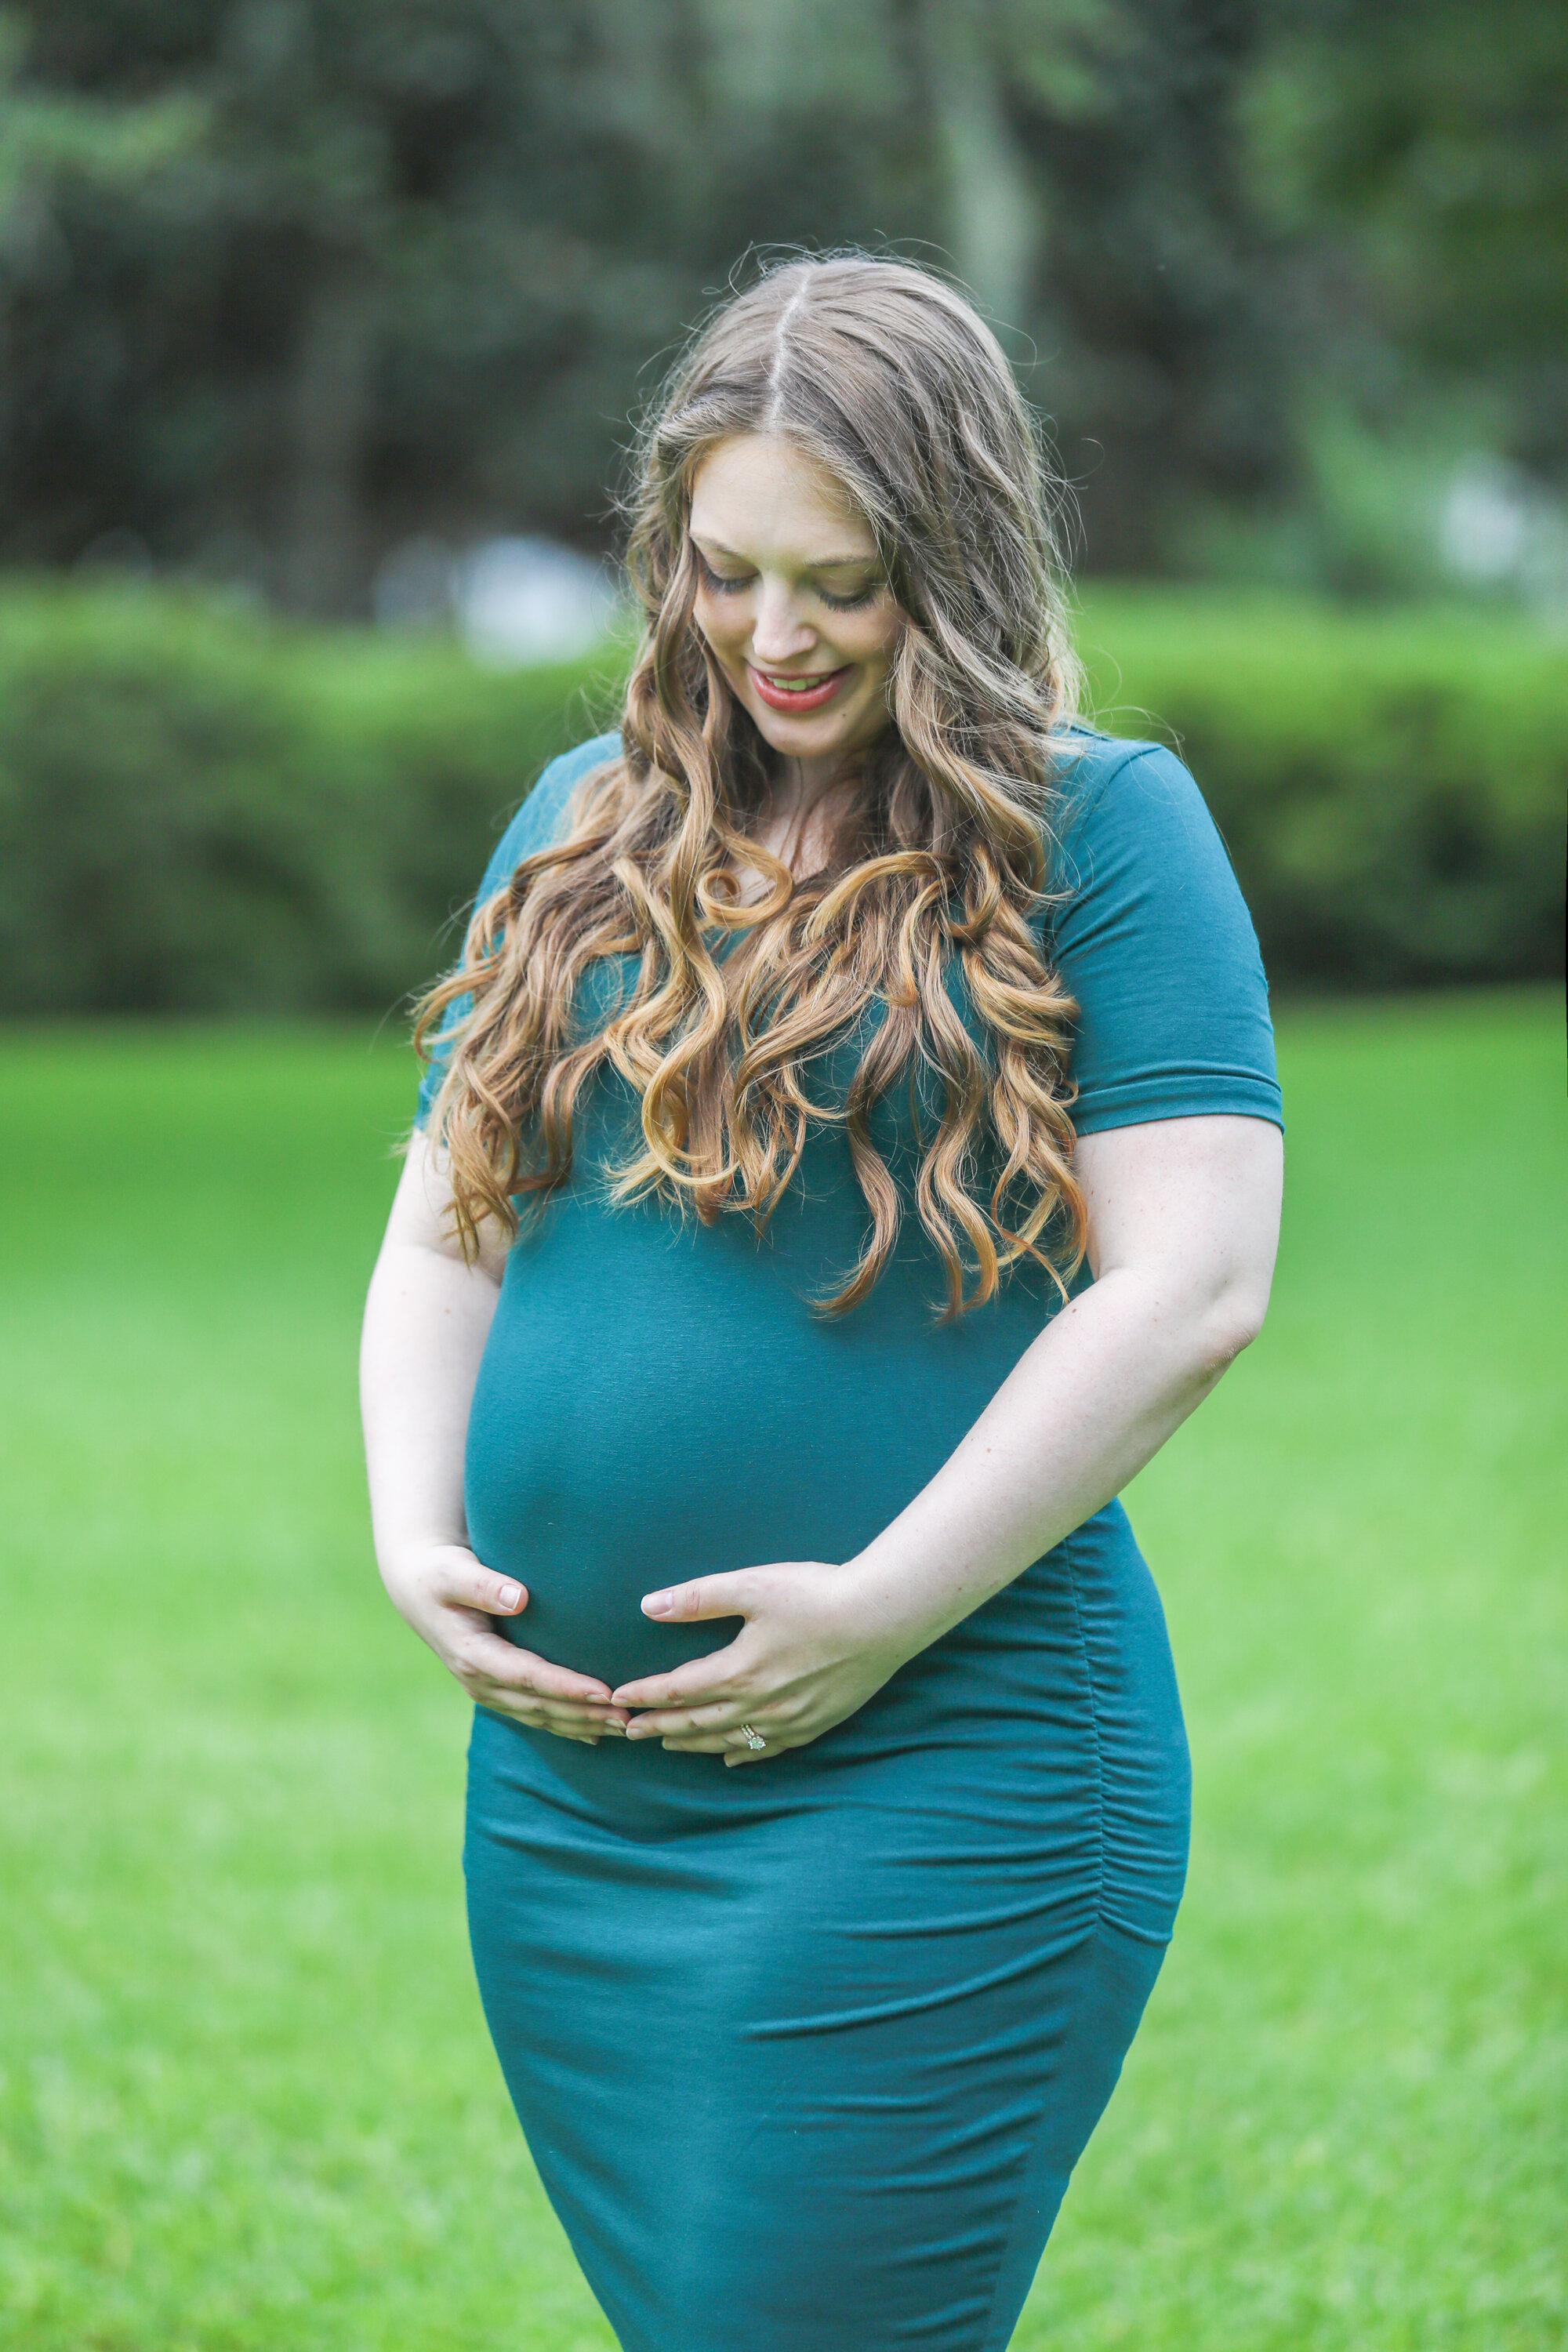 Gainesville Maternity Photography